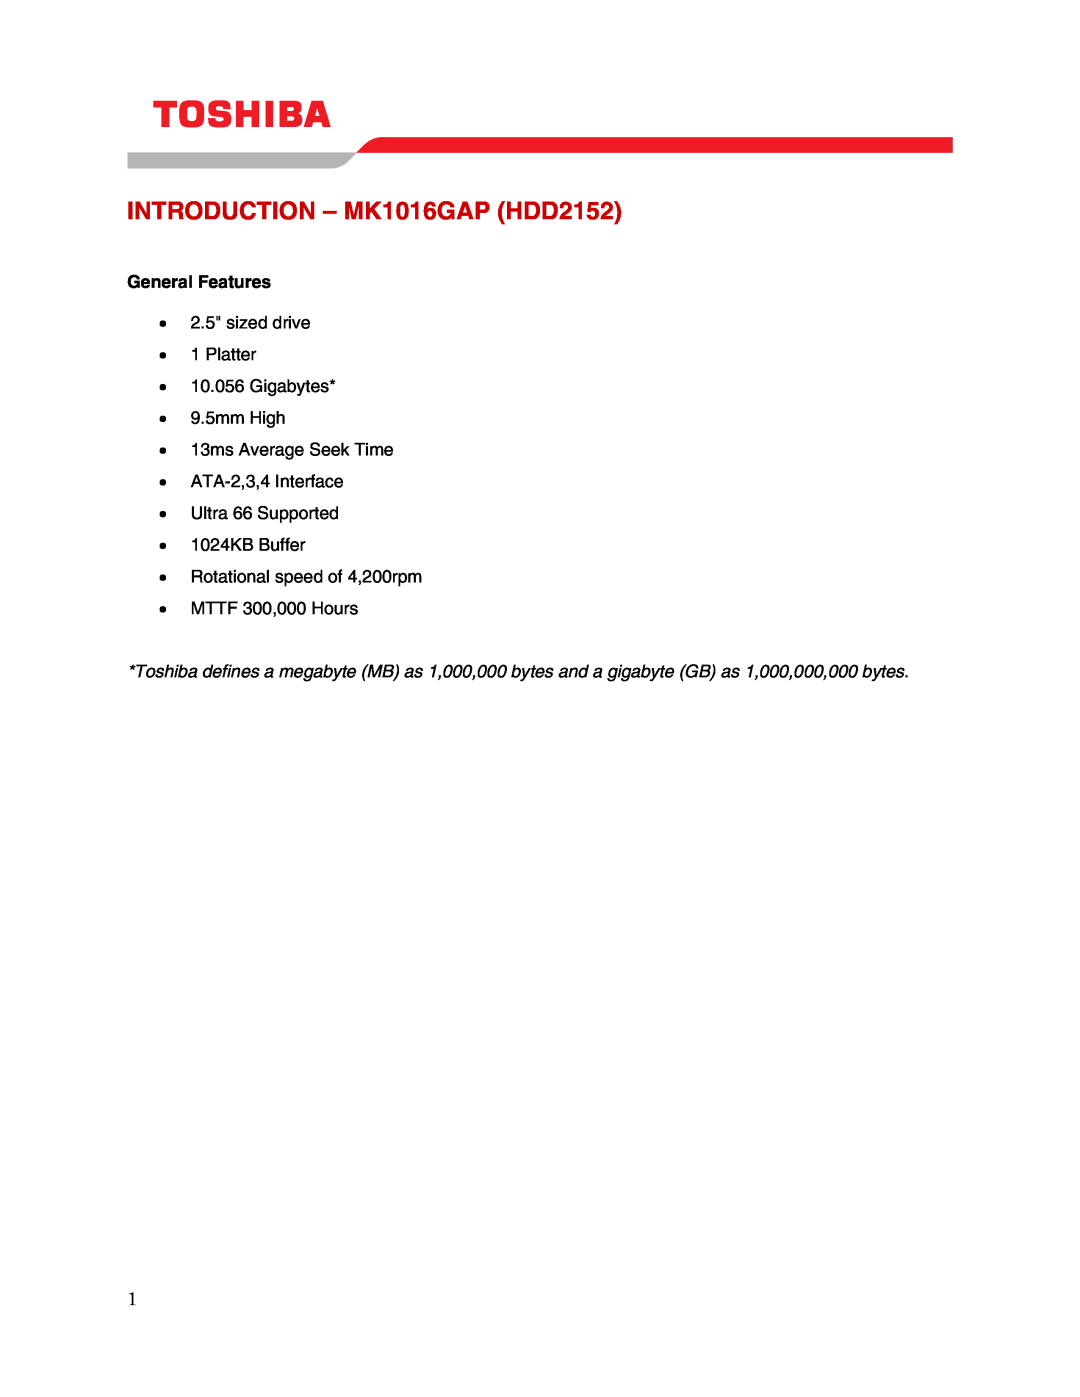 Toshiba user manual INTRODUCTION - MK1016GAP HDD2152, General Features 